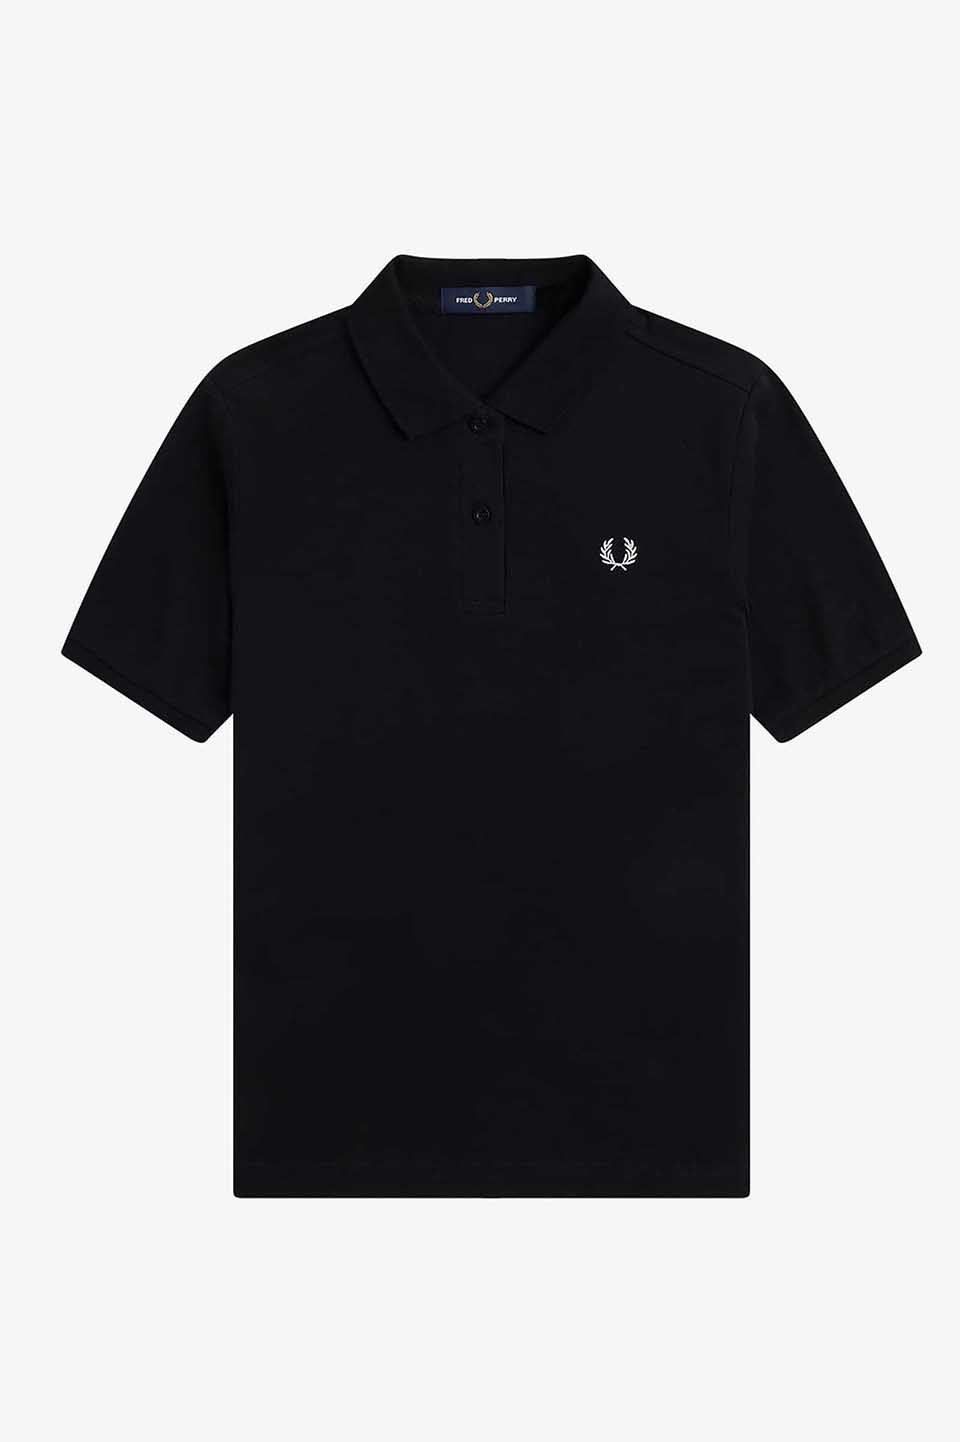 The Fred Perry Shirt - G6000